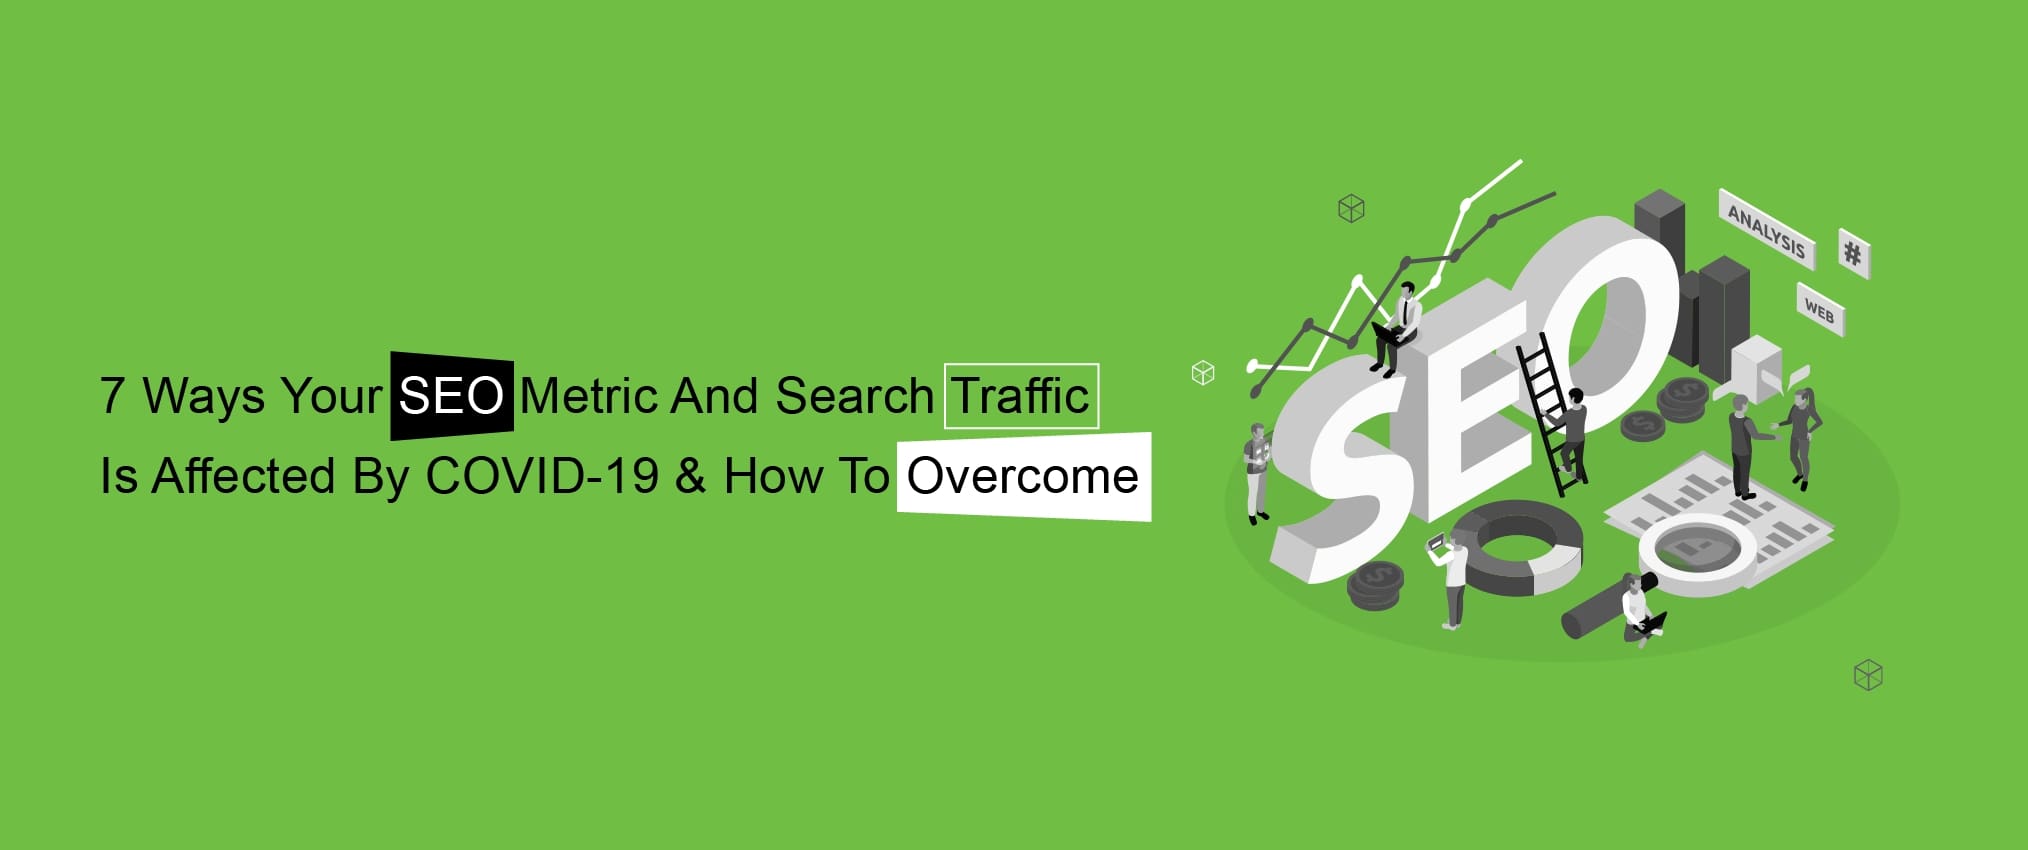 metric and search traffic covid 19 and how to overcome